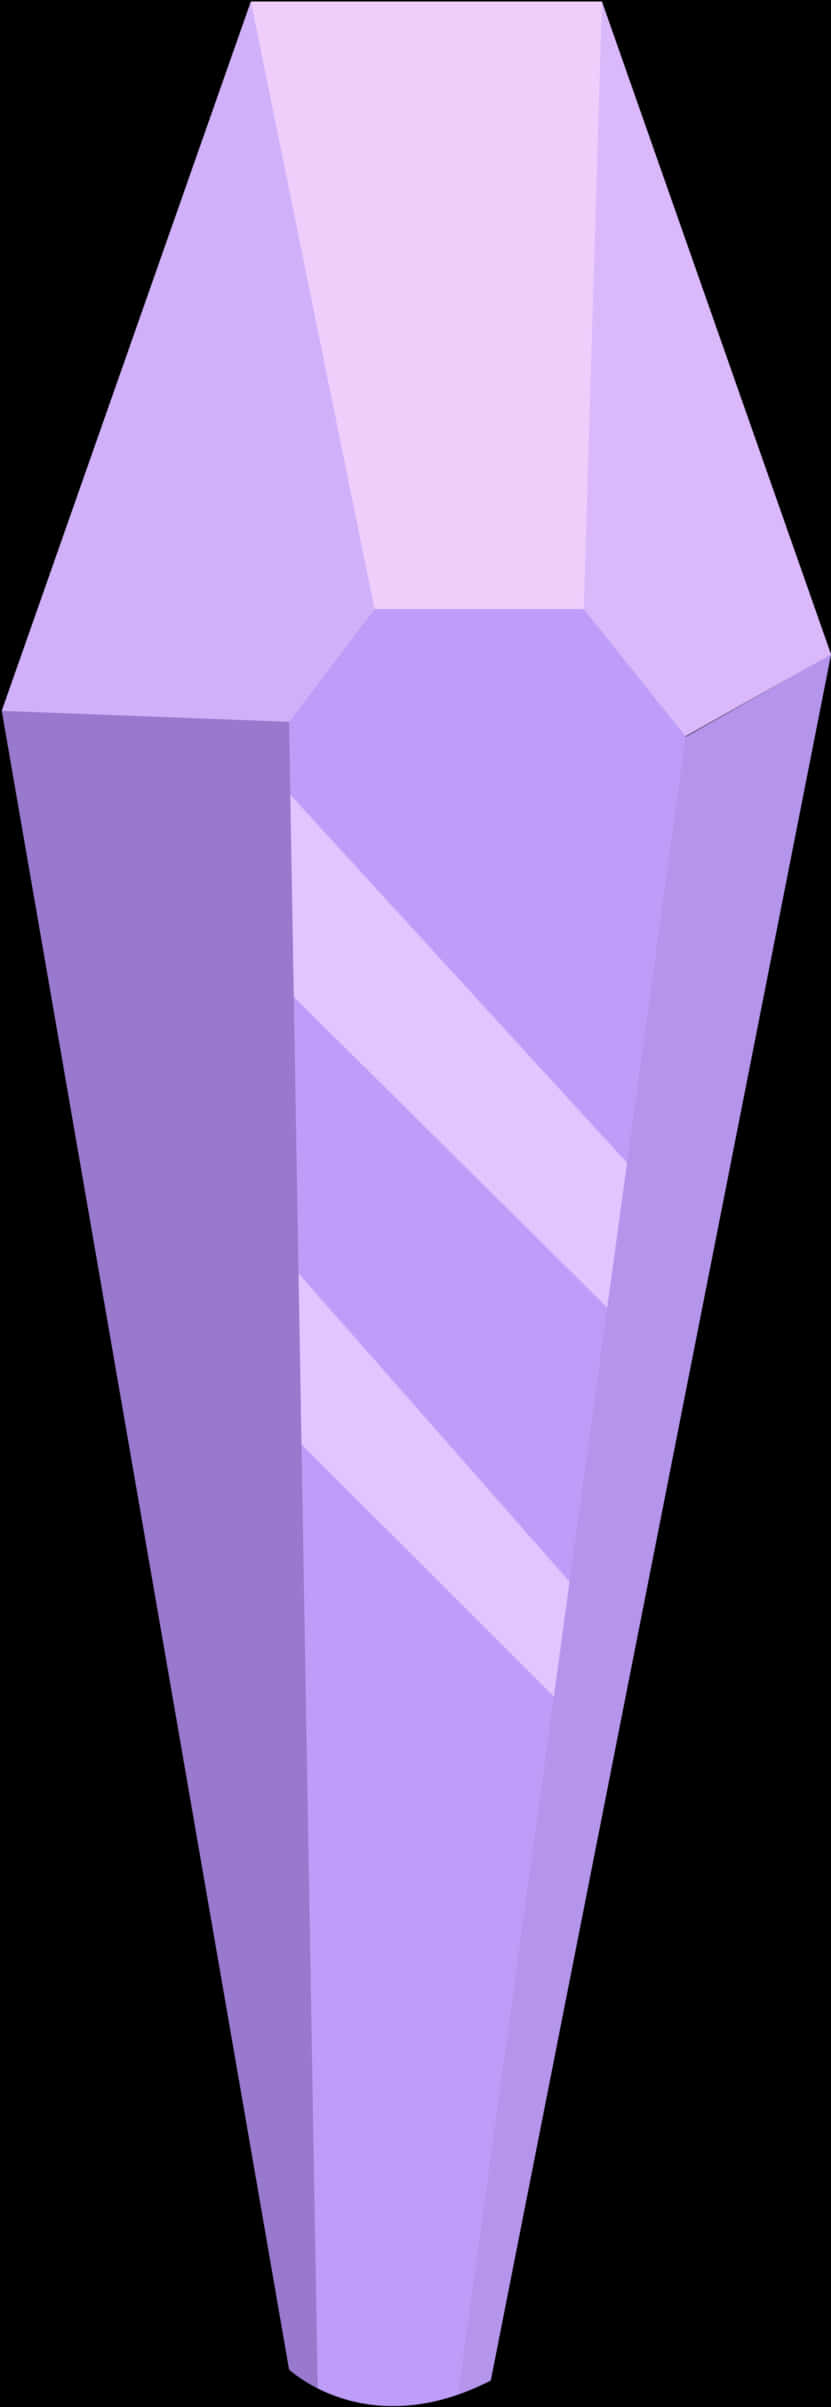 A Purple Rectangular Object With White Stripes